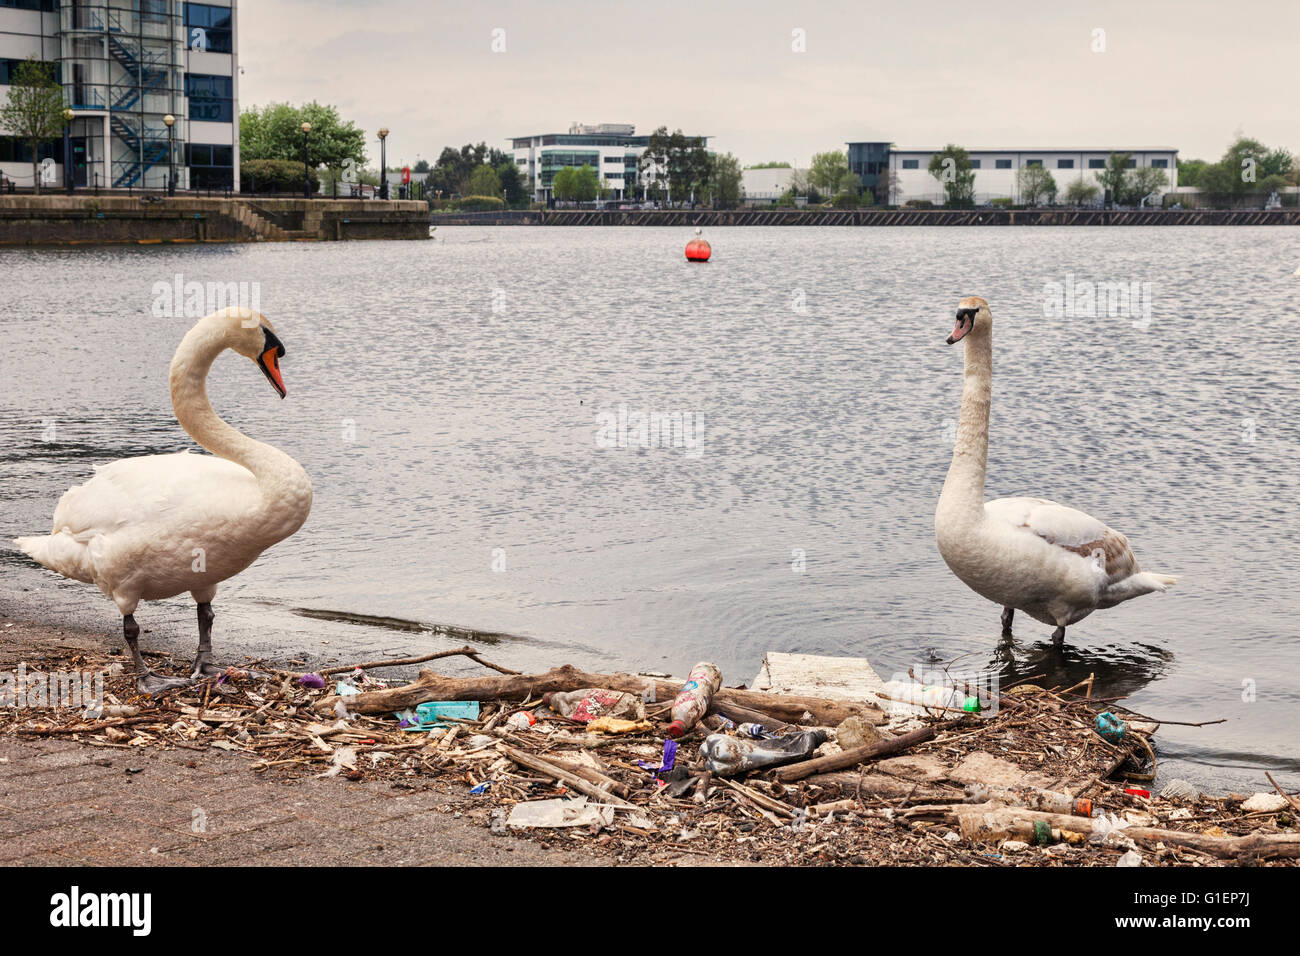 Swans and litter at the edge of the Manchester Ship Canal, Salford Quays, Manchester, England, UK Stock Photo